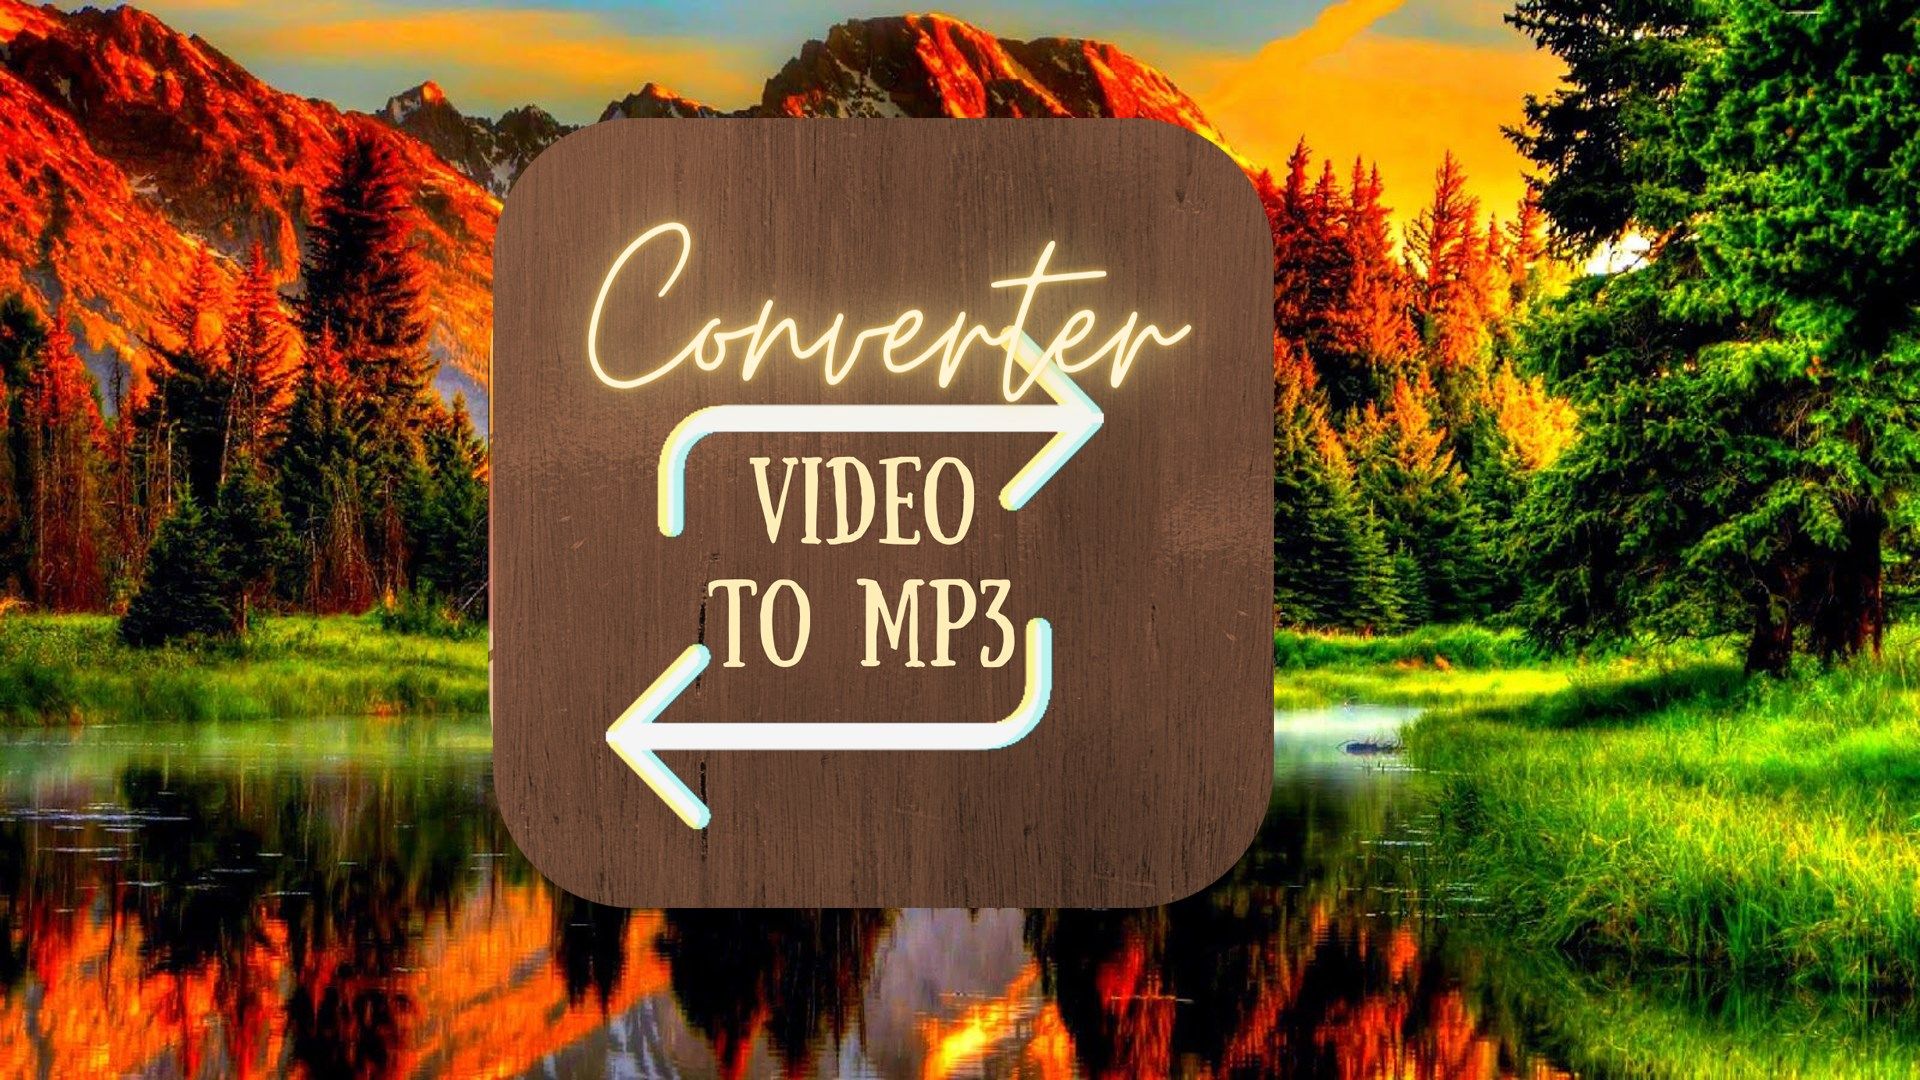 Converter - Video To Mp3